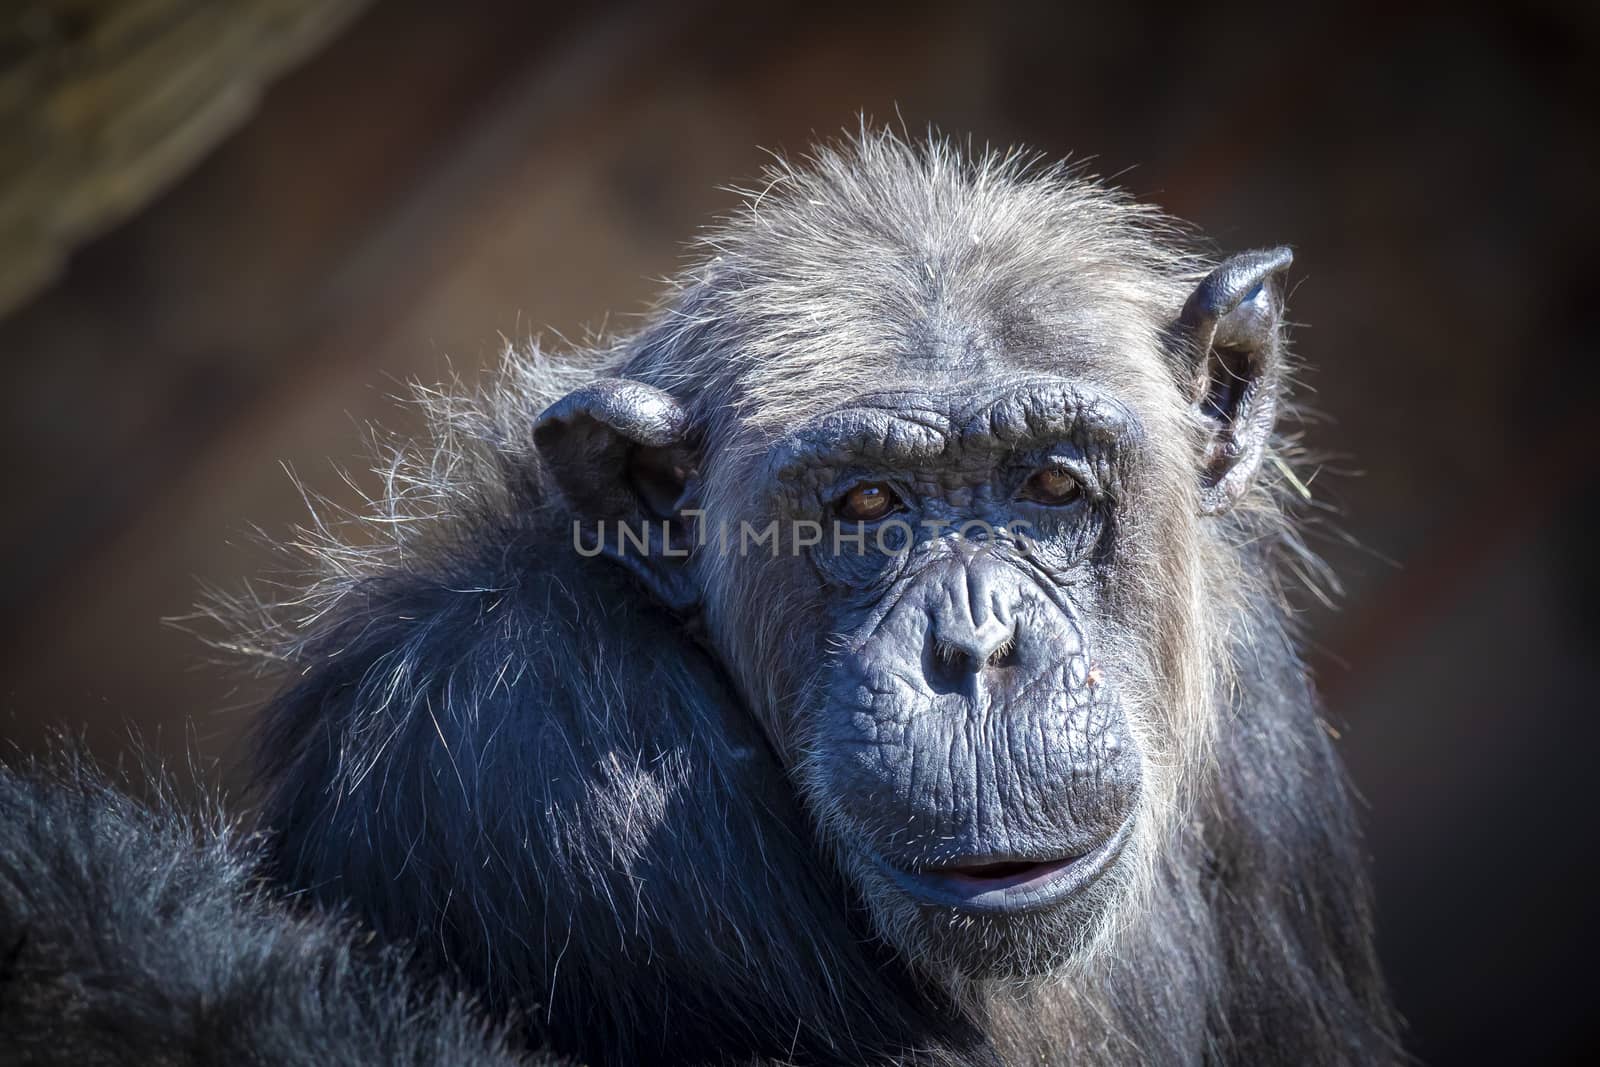 An old Chimpanzee resting in the sunshine by WittkePhotos